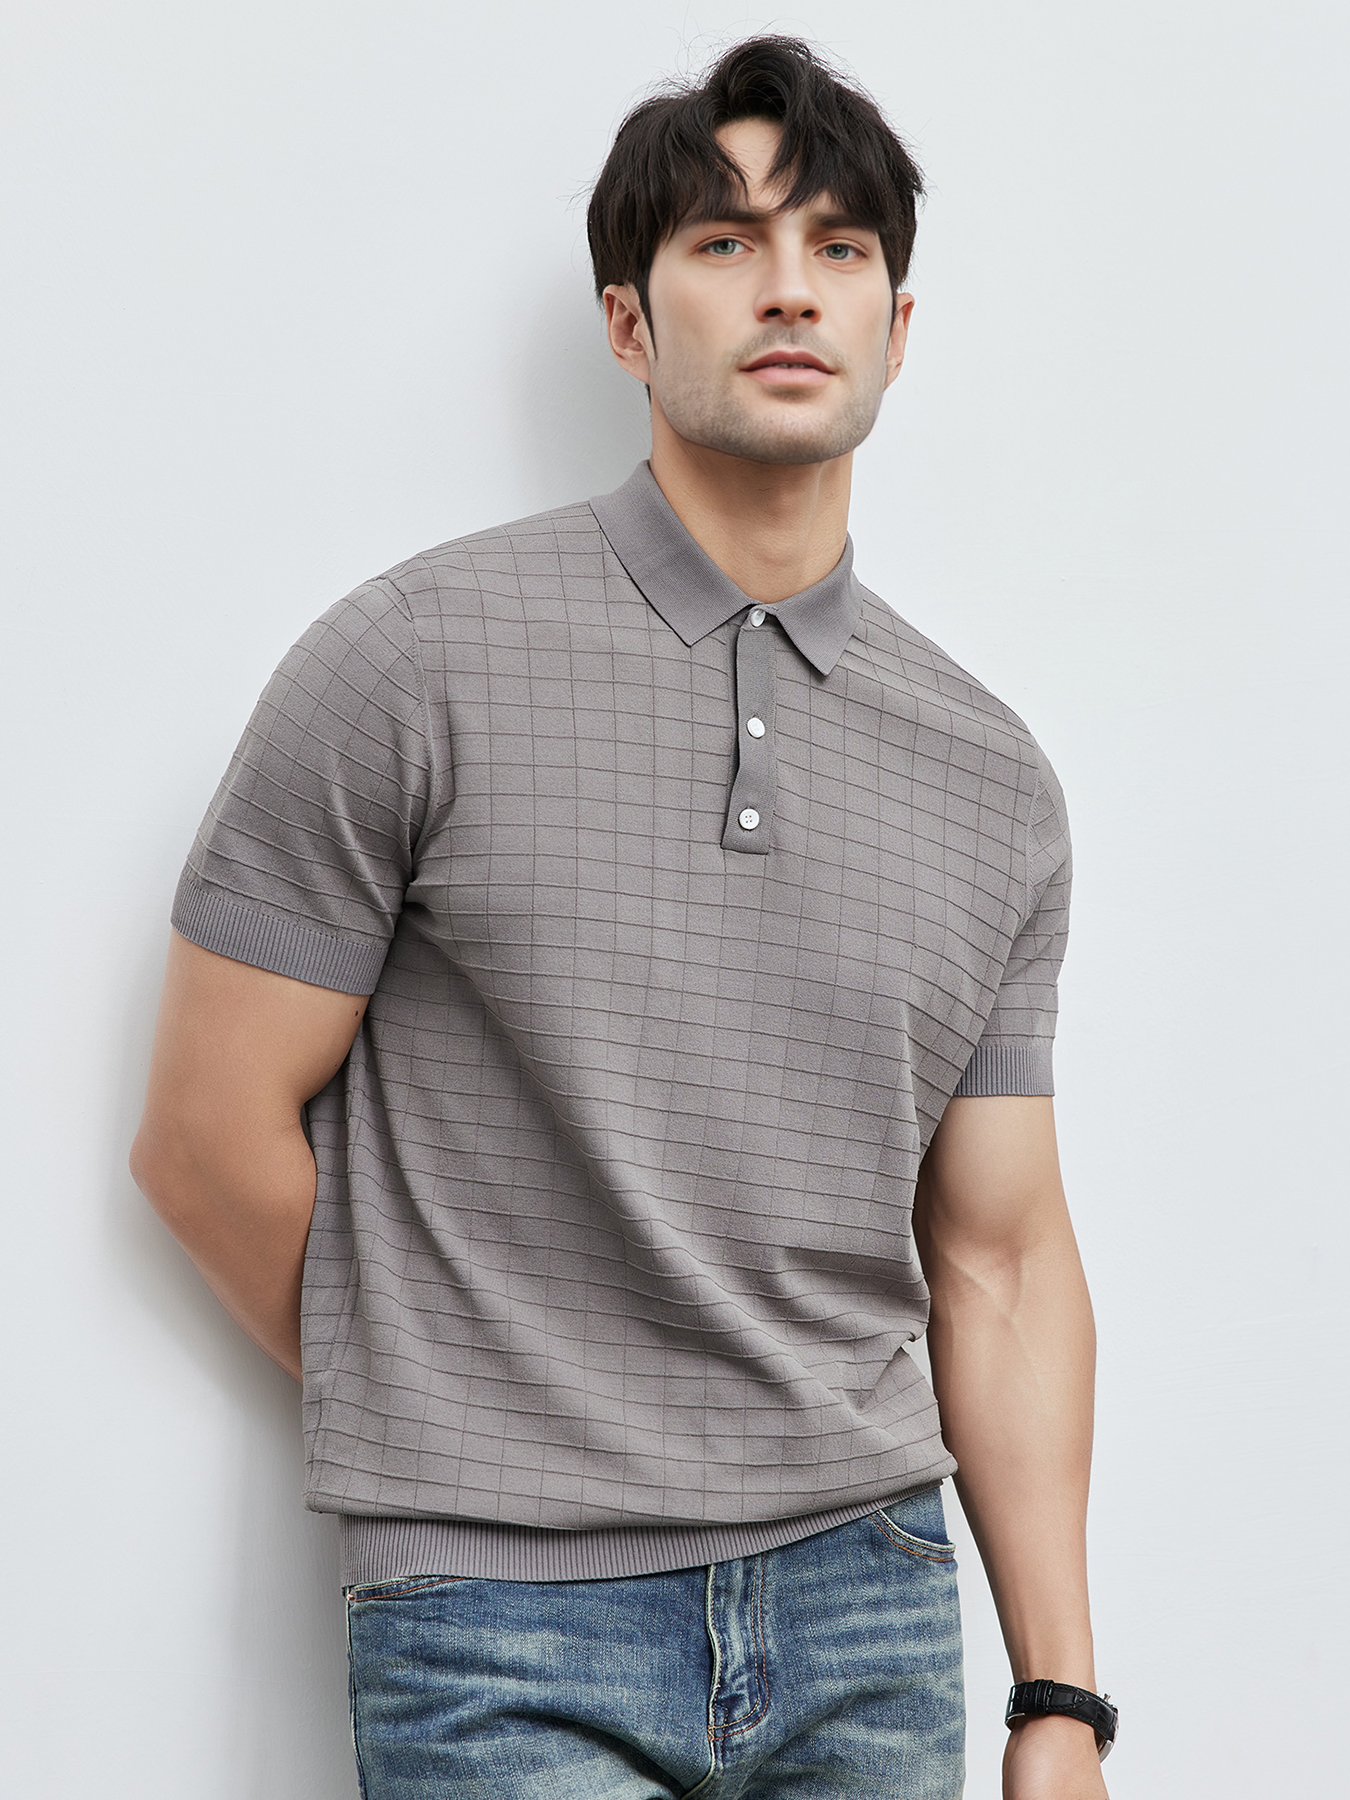 GentleKnit Checkered Short Sleeve Knitted Polo